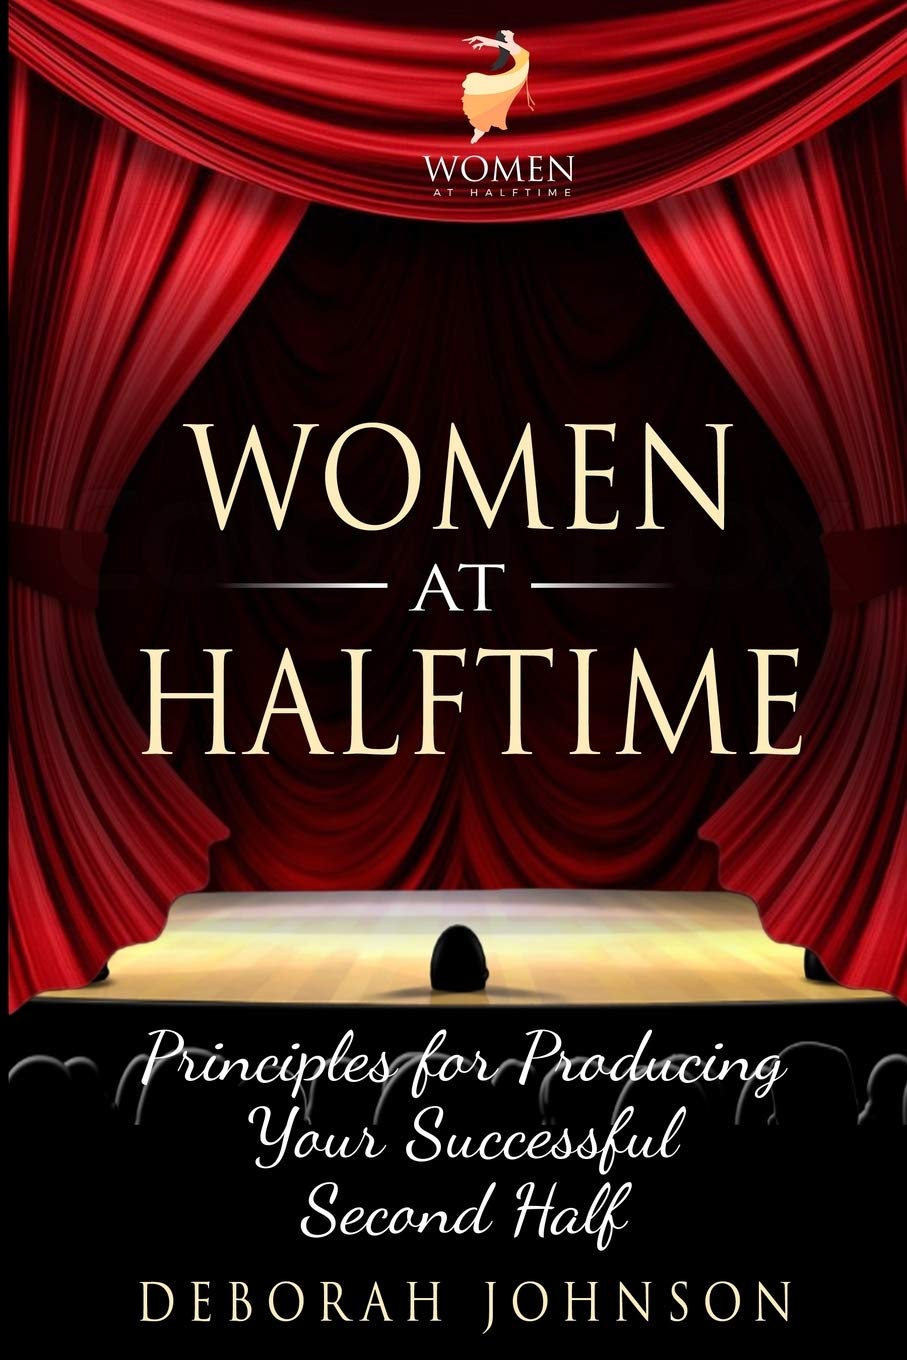 Women at Halftime Principles for Producing Your Successful Second Half - SureShot Books Publishing LLC